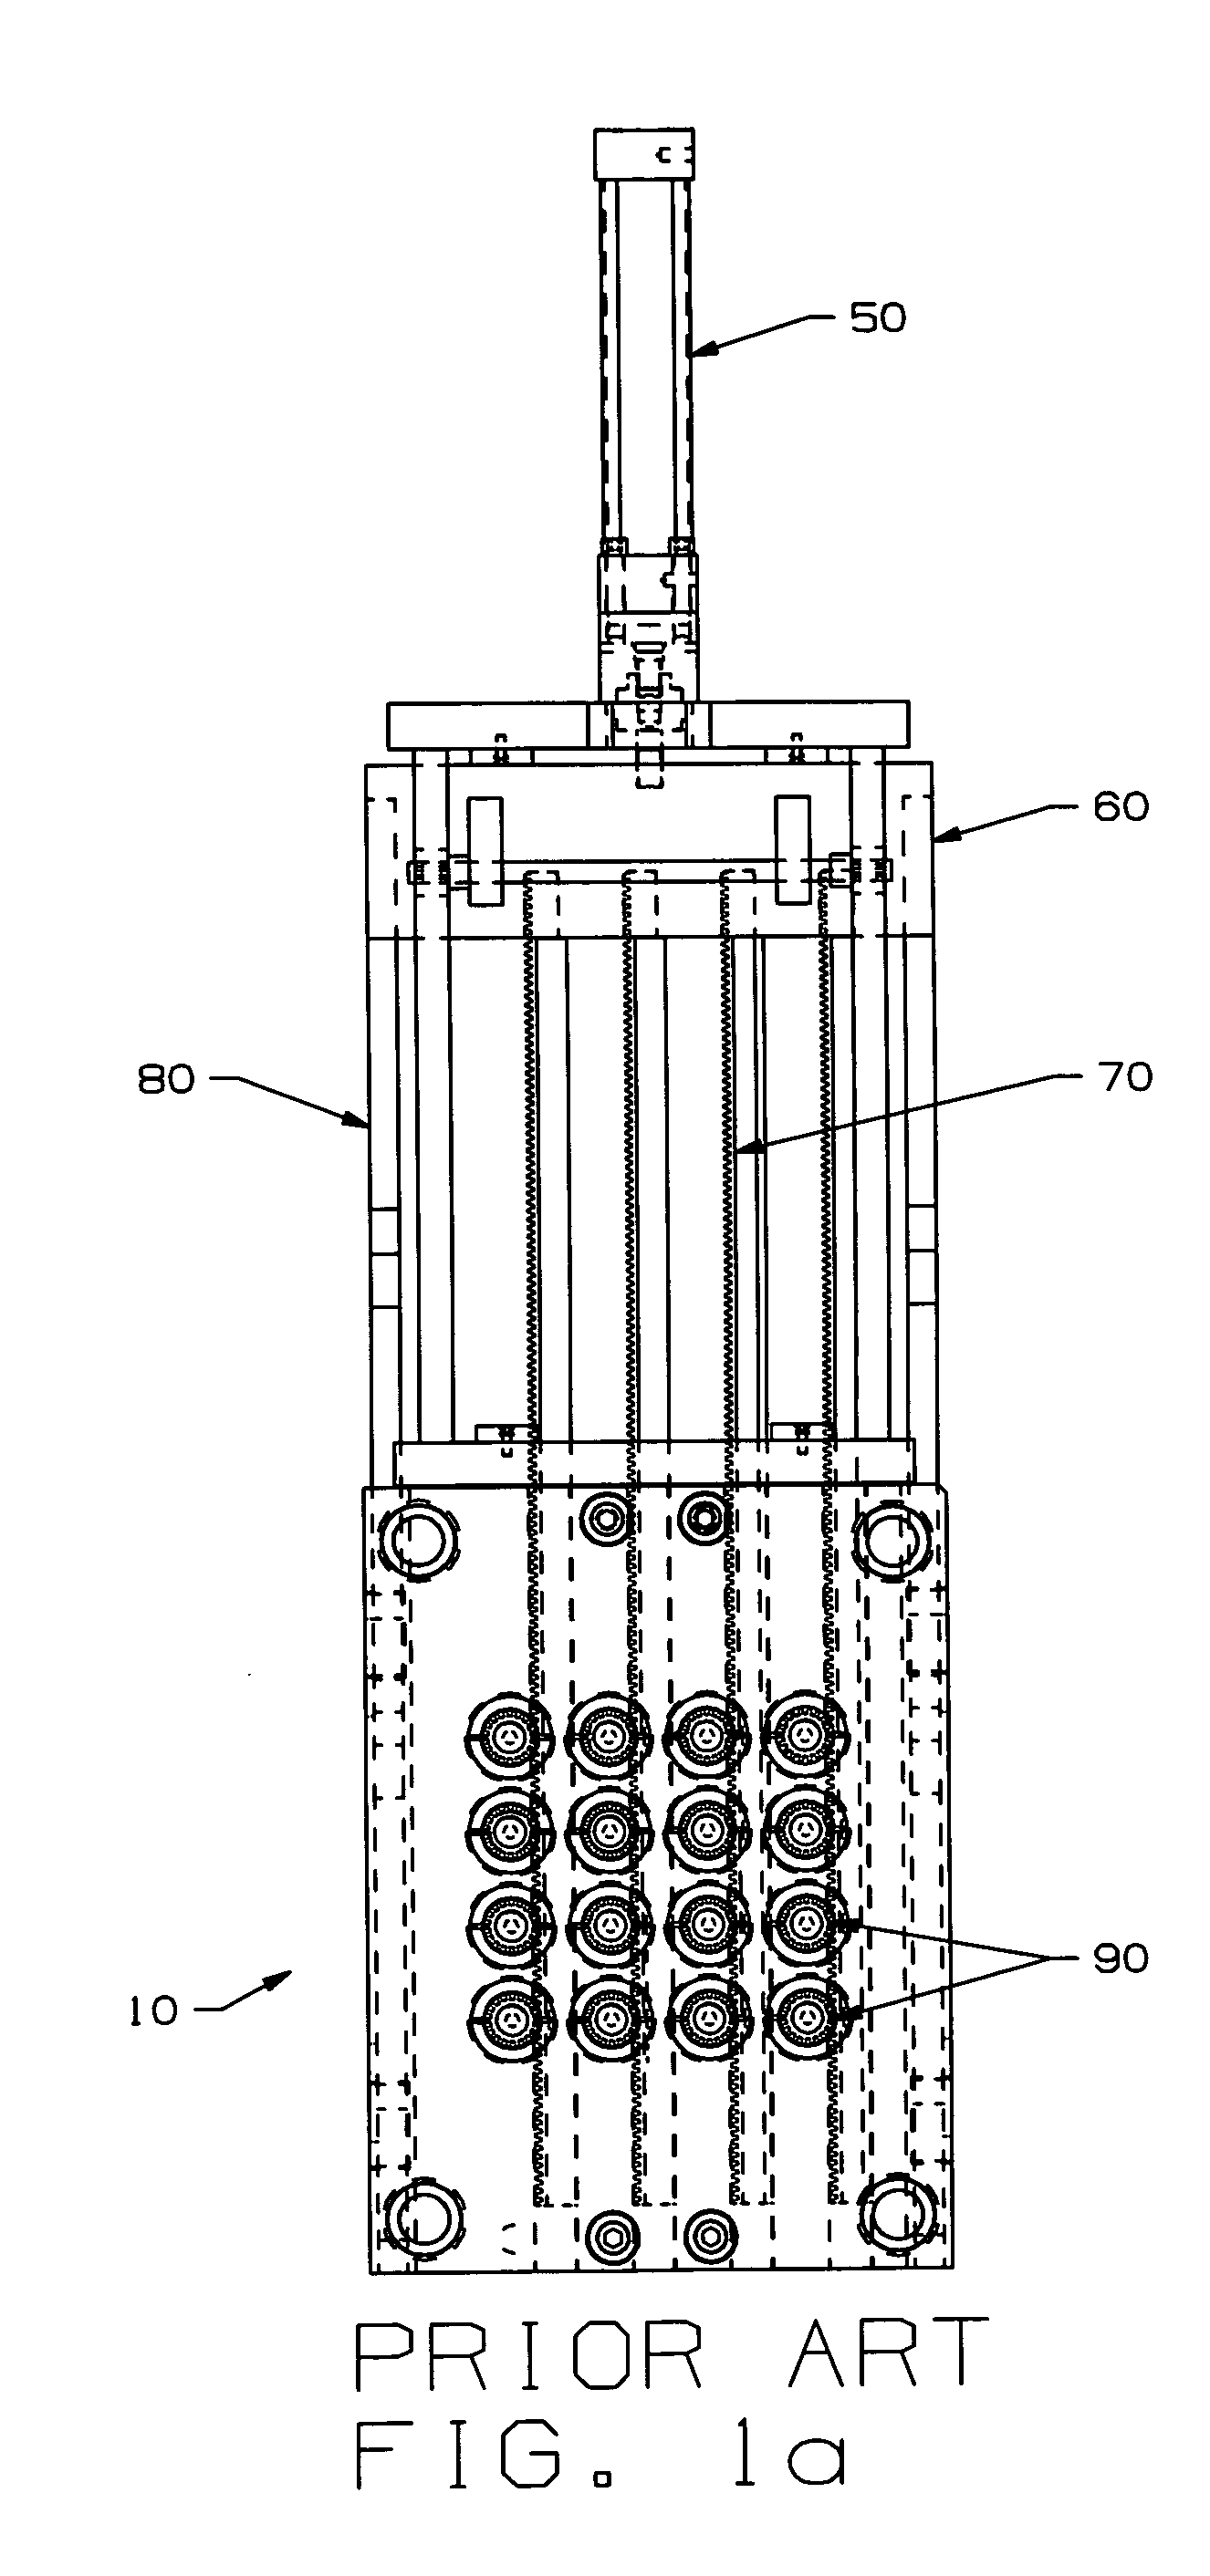 Apparatus for making threaded articles in a plastic injection molding process